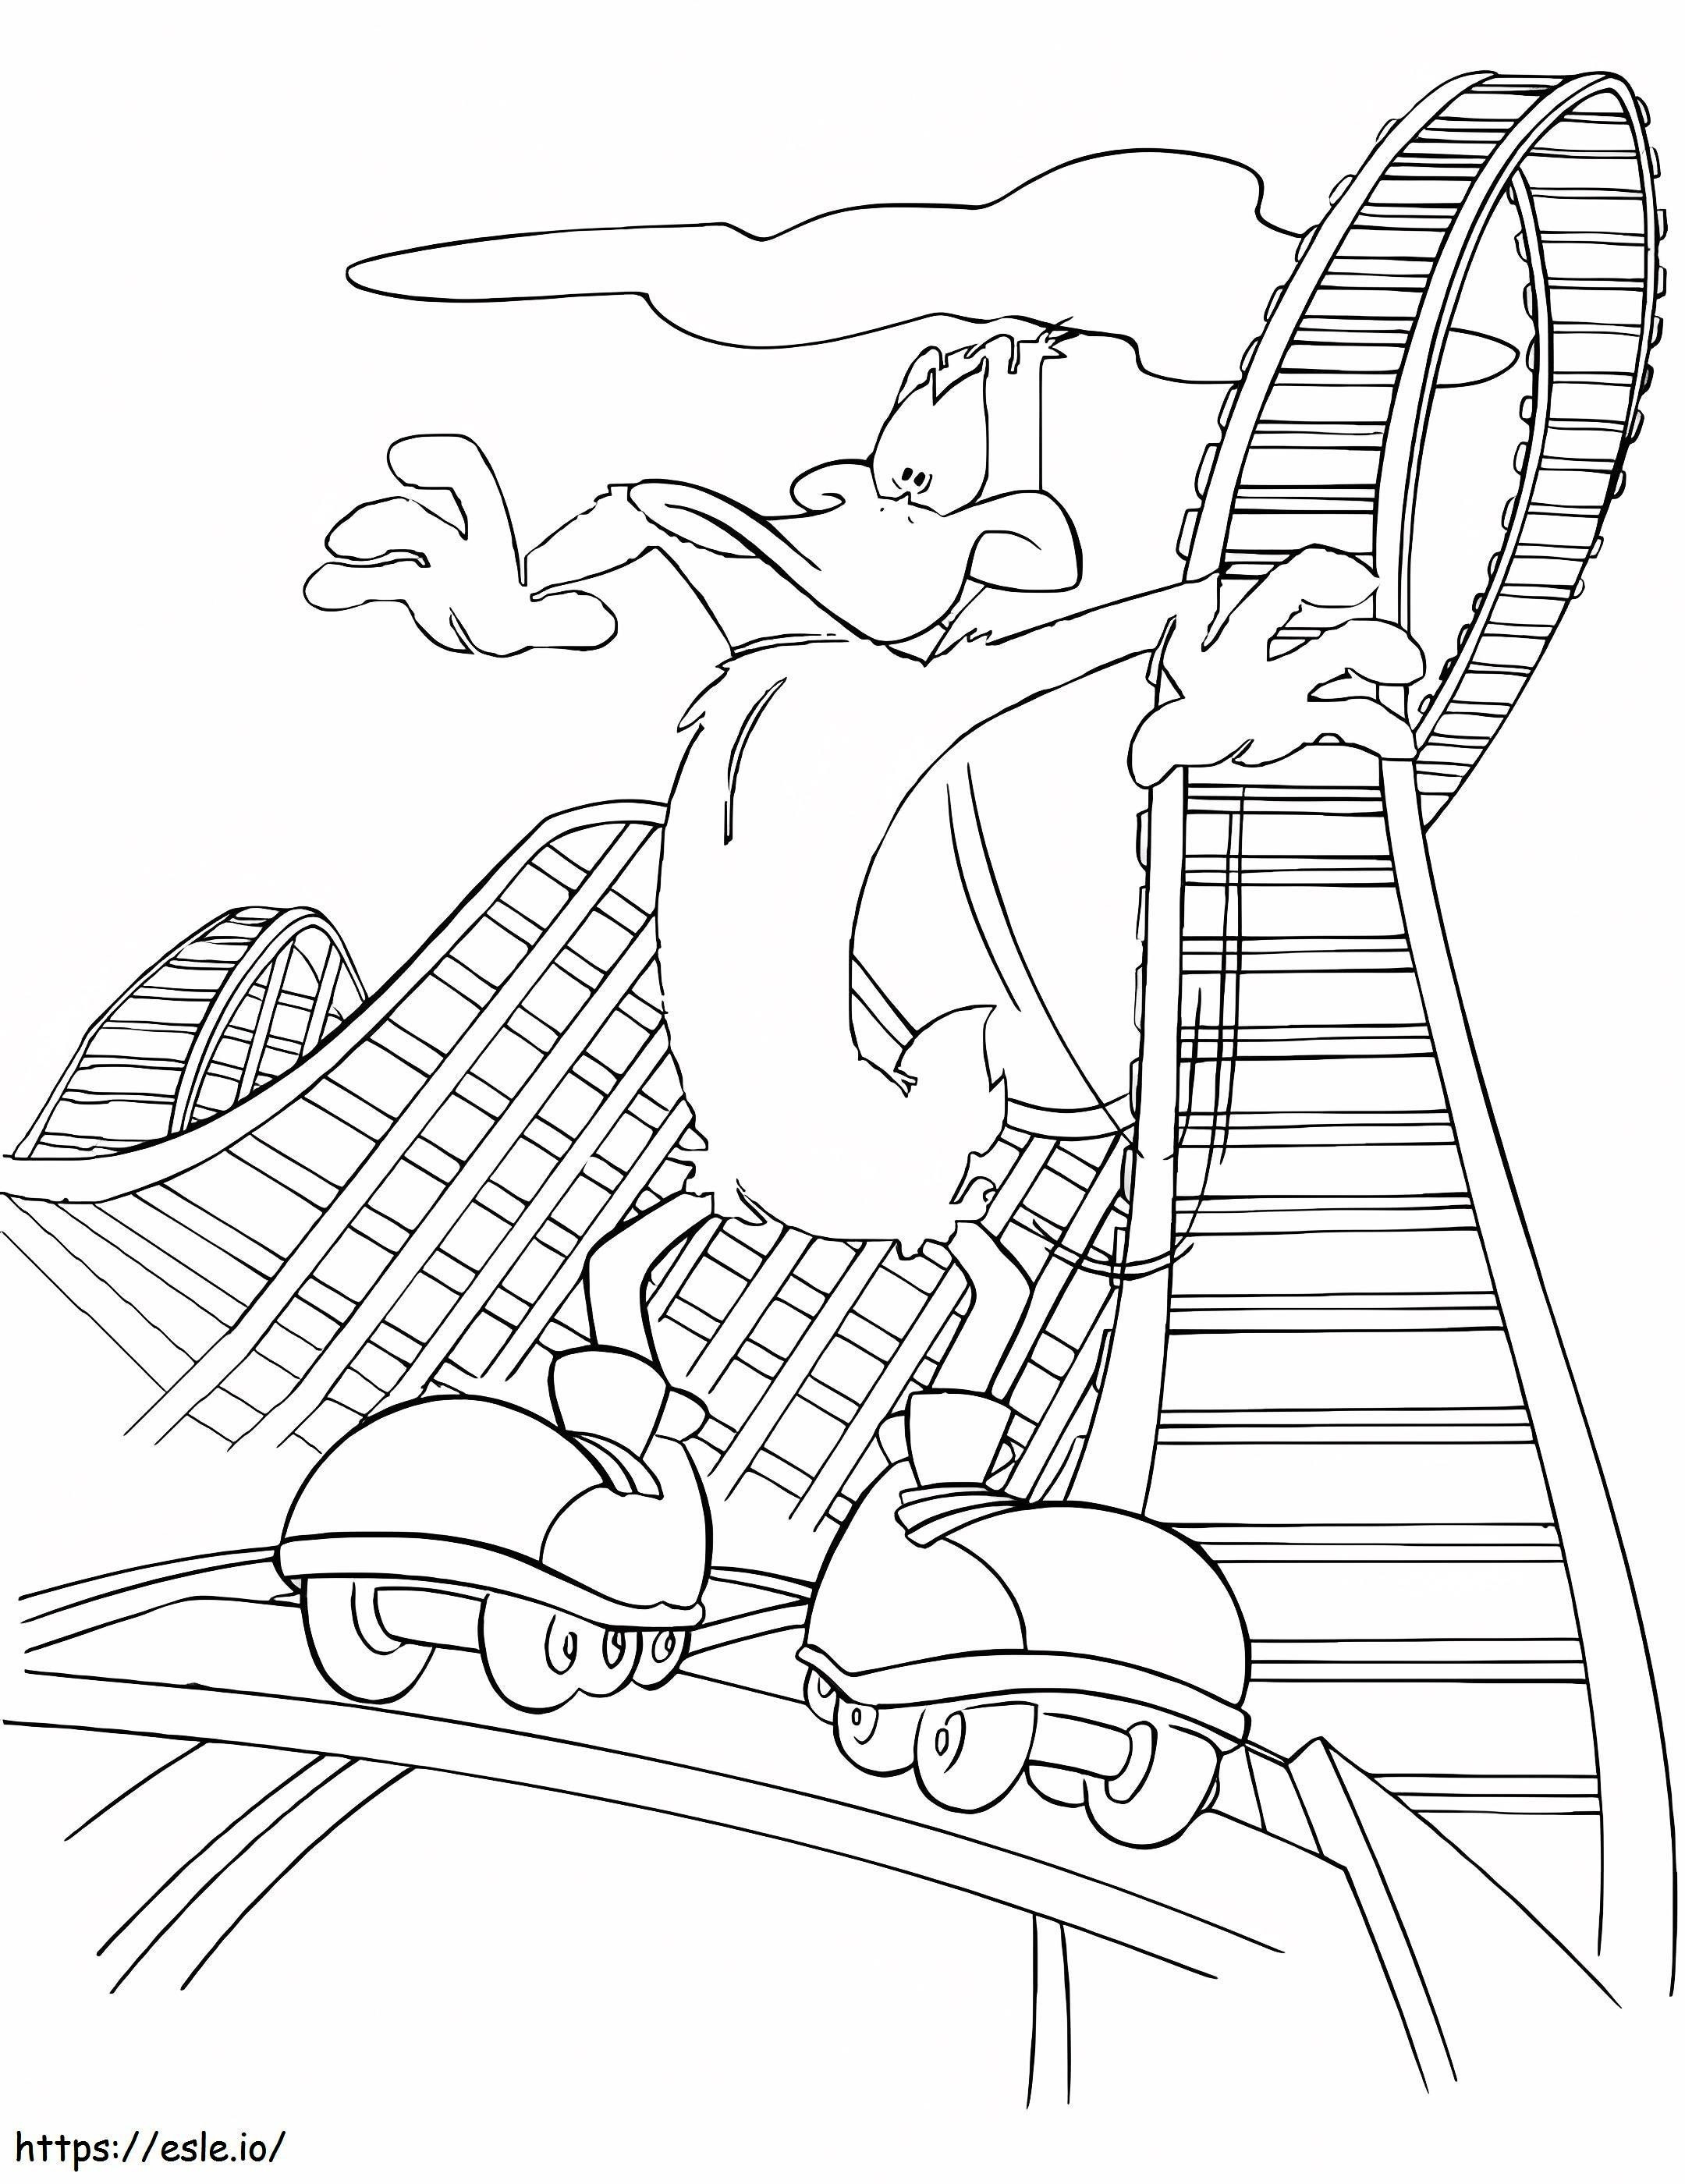 Daffy Duck Fun coloring page